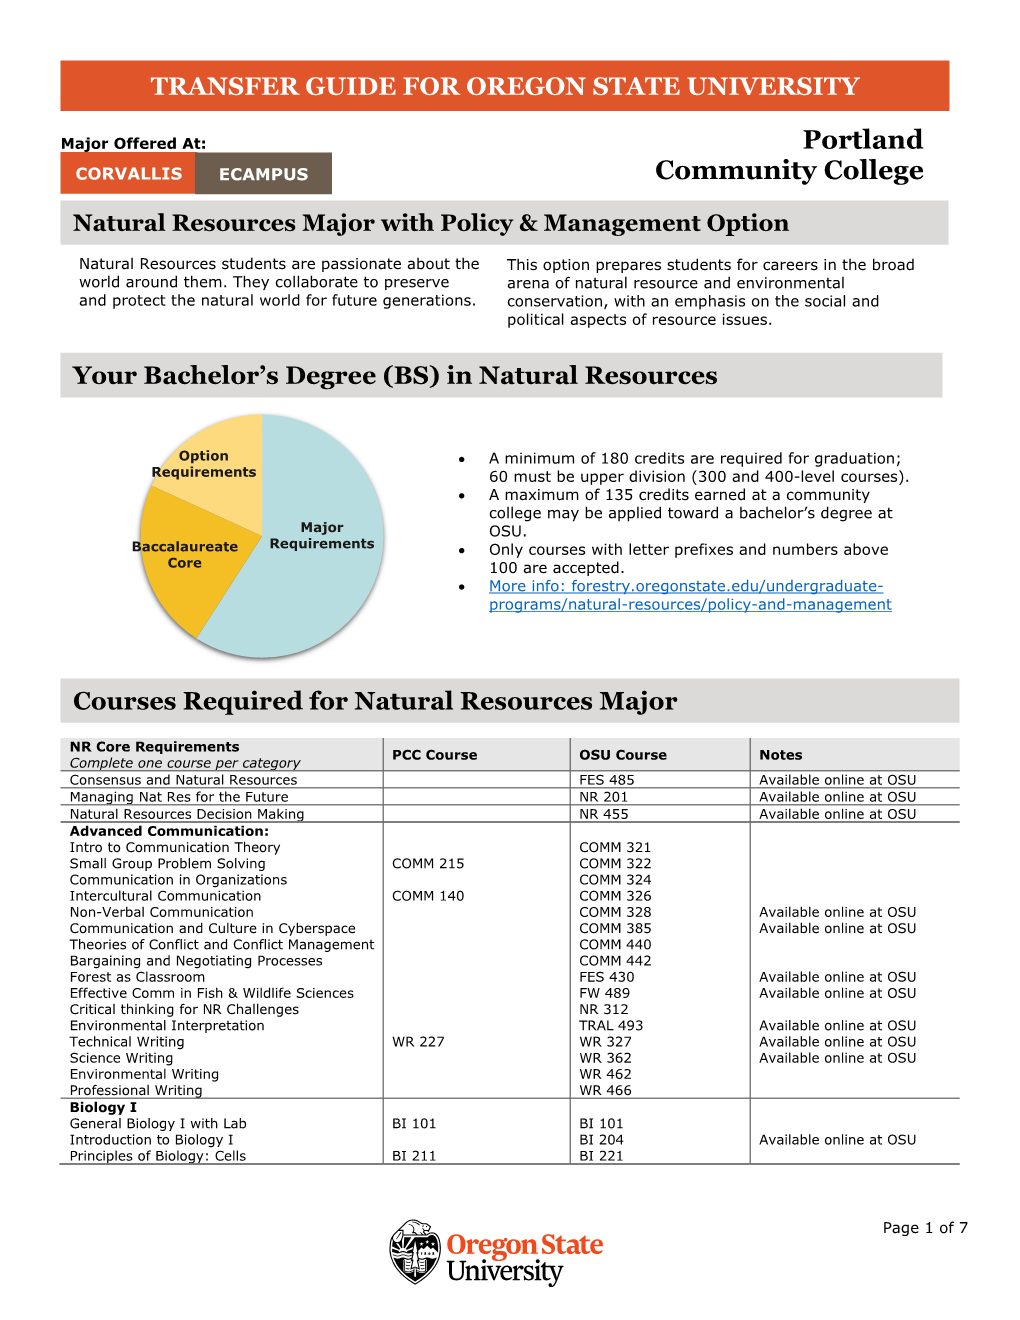 Natural Resources Major with Policy & Management Option